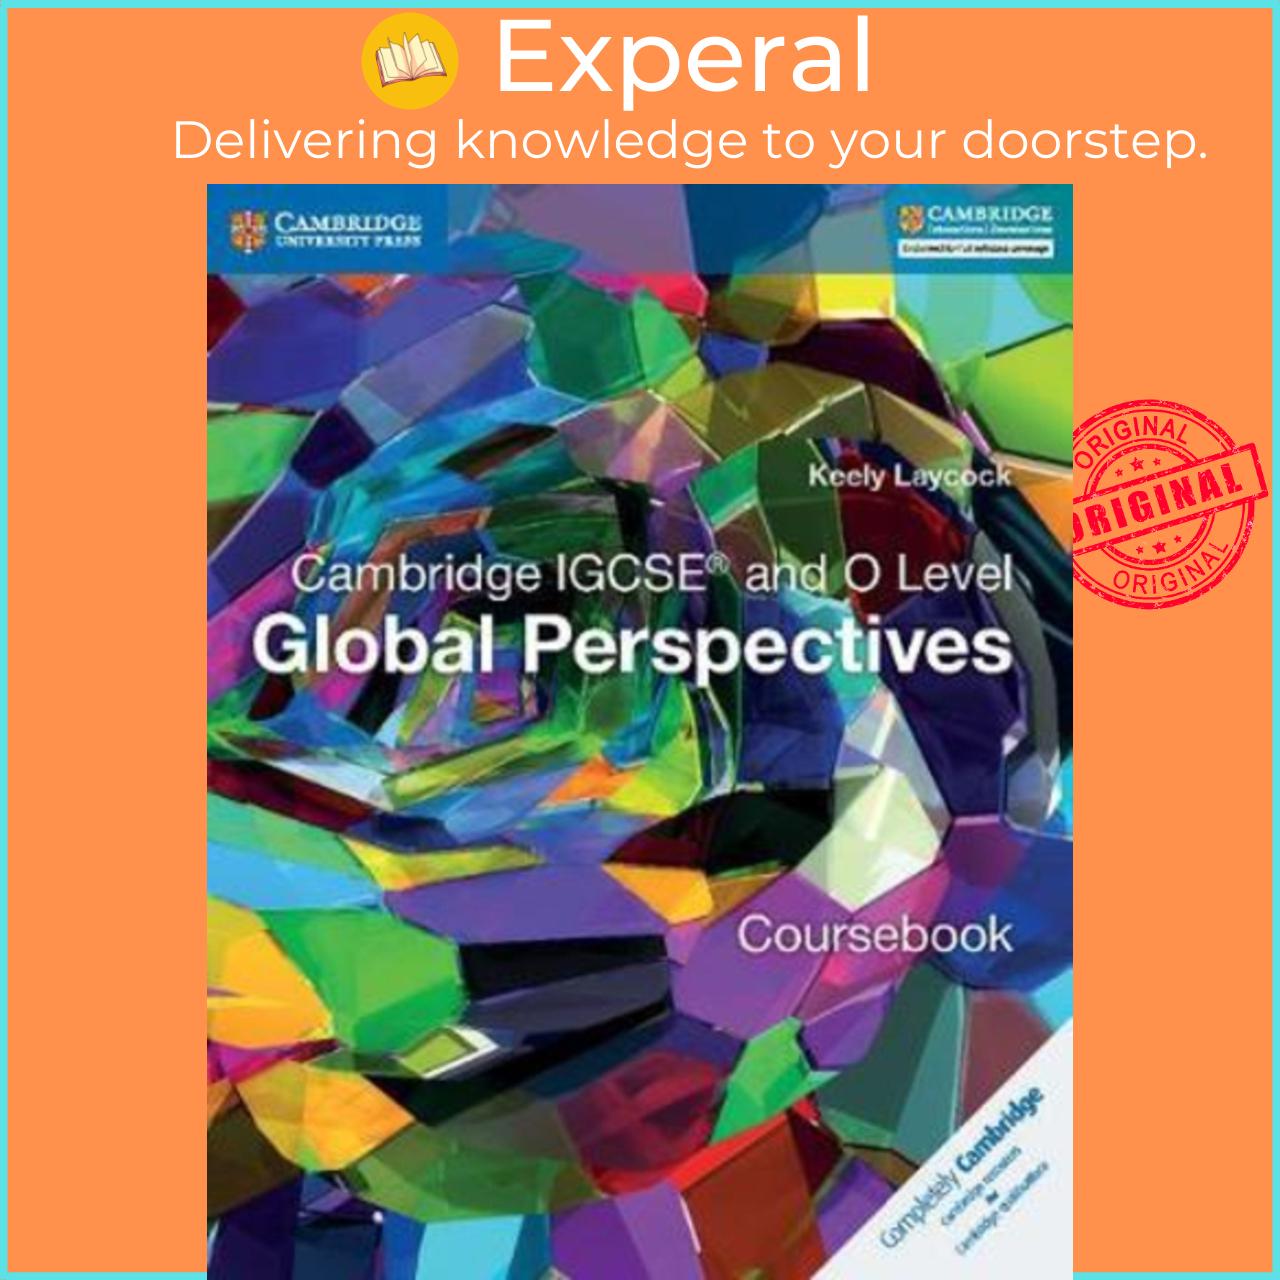 Sách - Cambridge IGCSE (R) and O Level Global Perspectives Coursebook by Keely Laycock (UK edition, paperback)